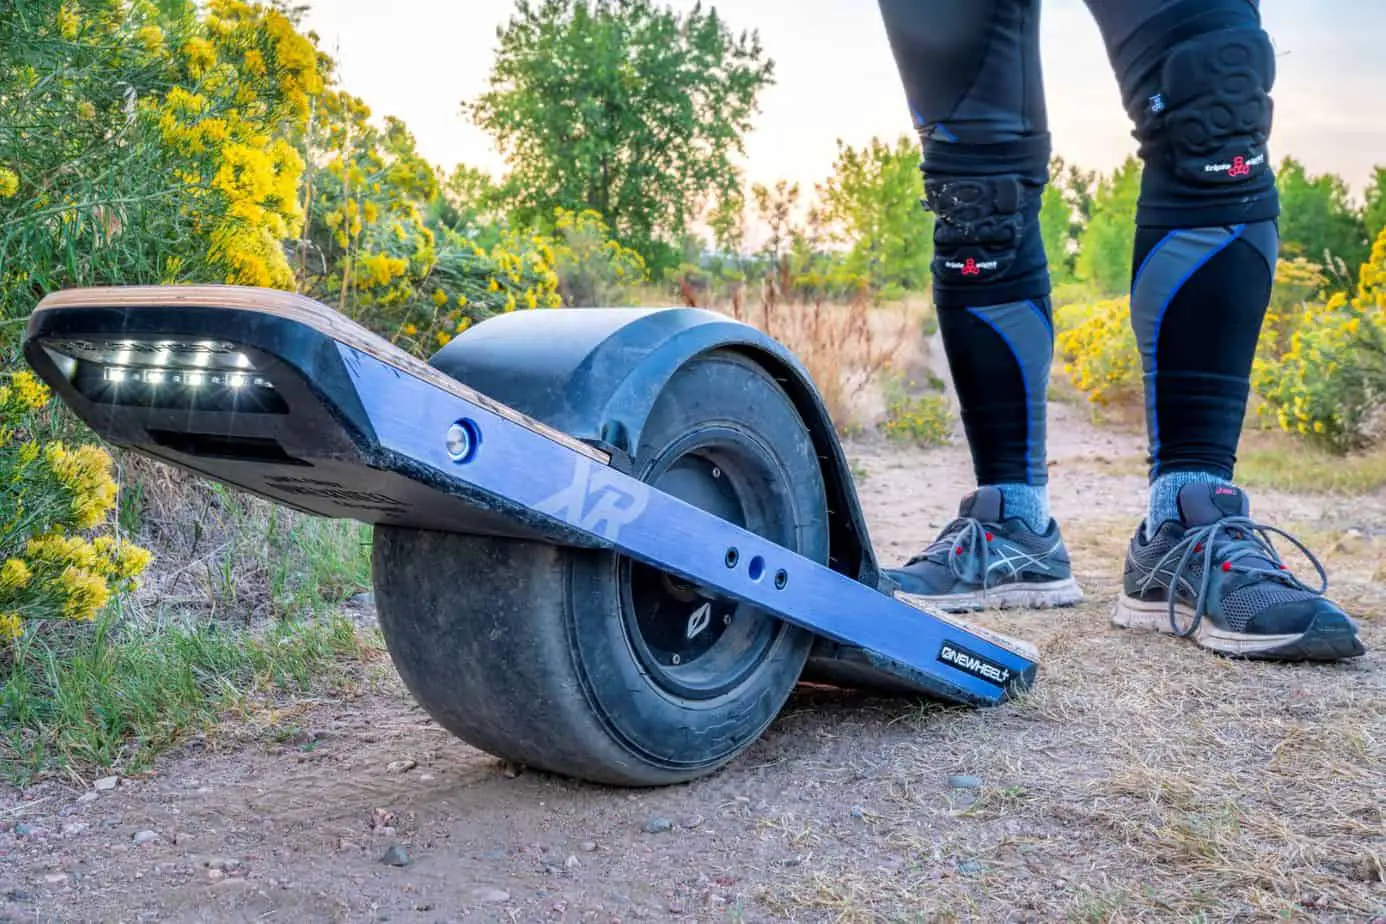 Why is the OneWheel so expensive?